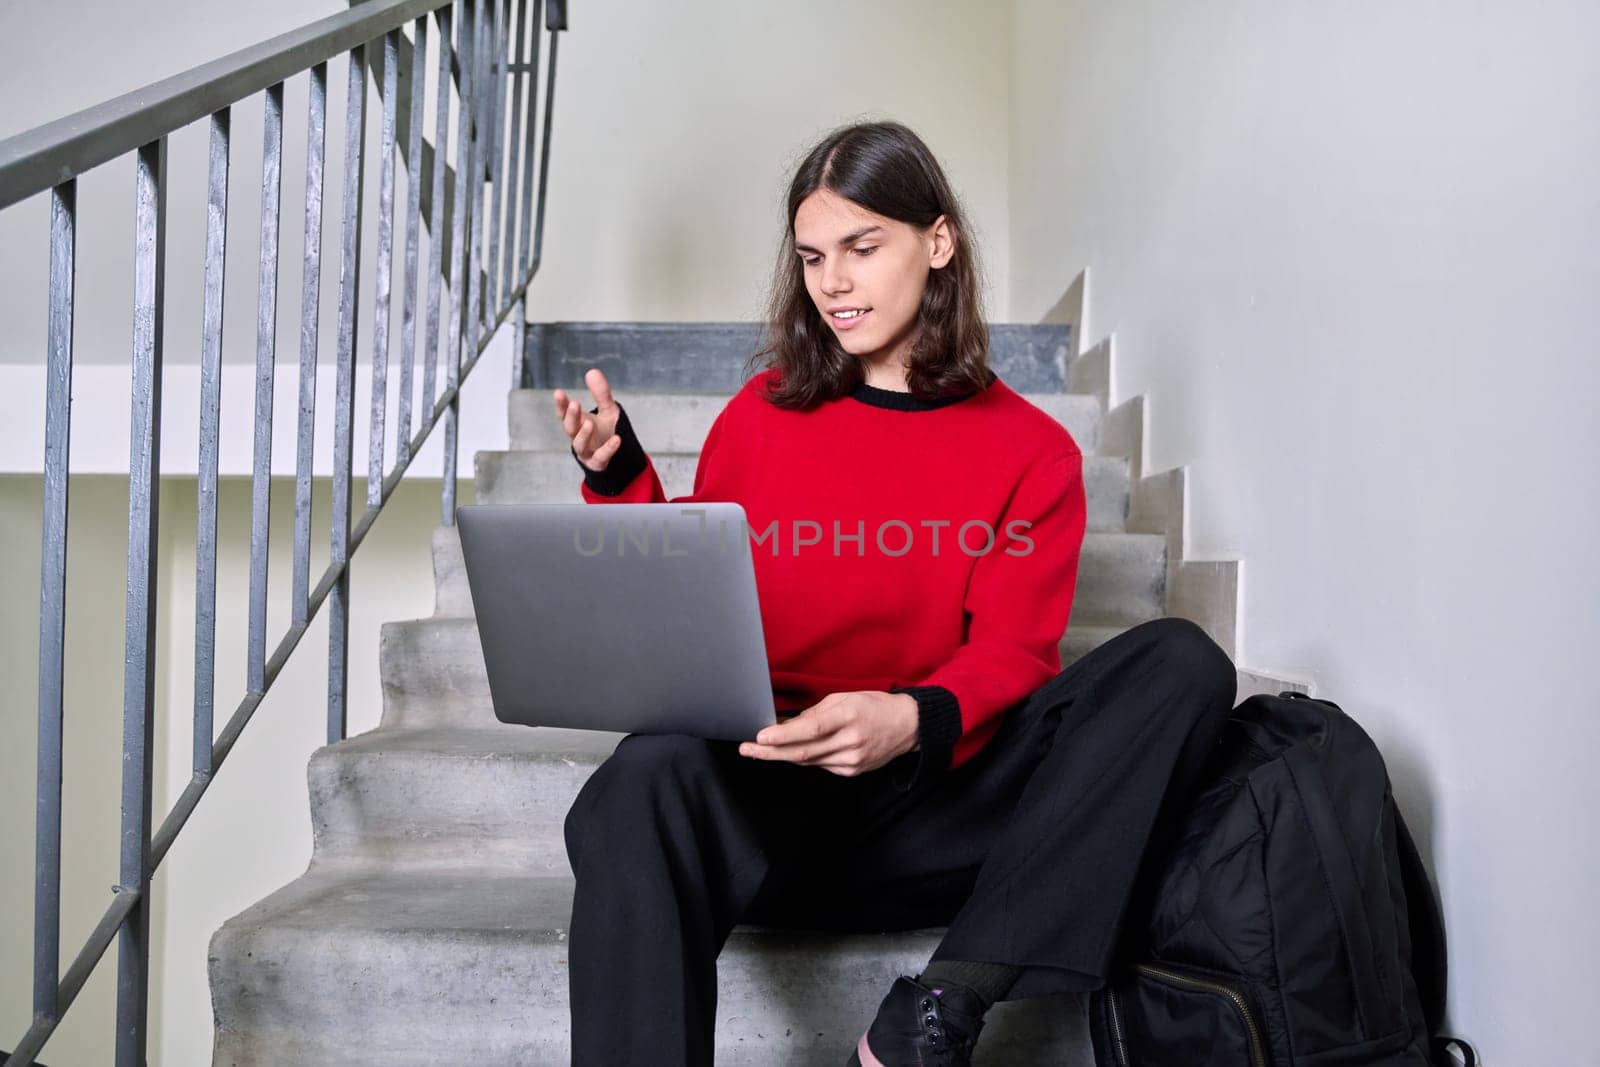 Portrait of handsome student guy with backpack on steps inside building using laptop, talking on video chat. Youth, college, university, education, technology, lifestyle, young people concept